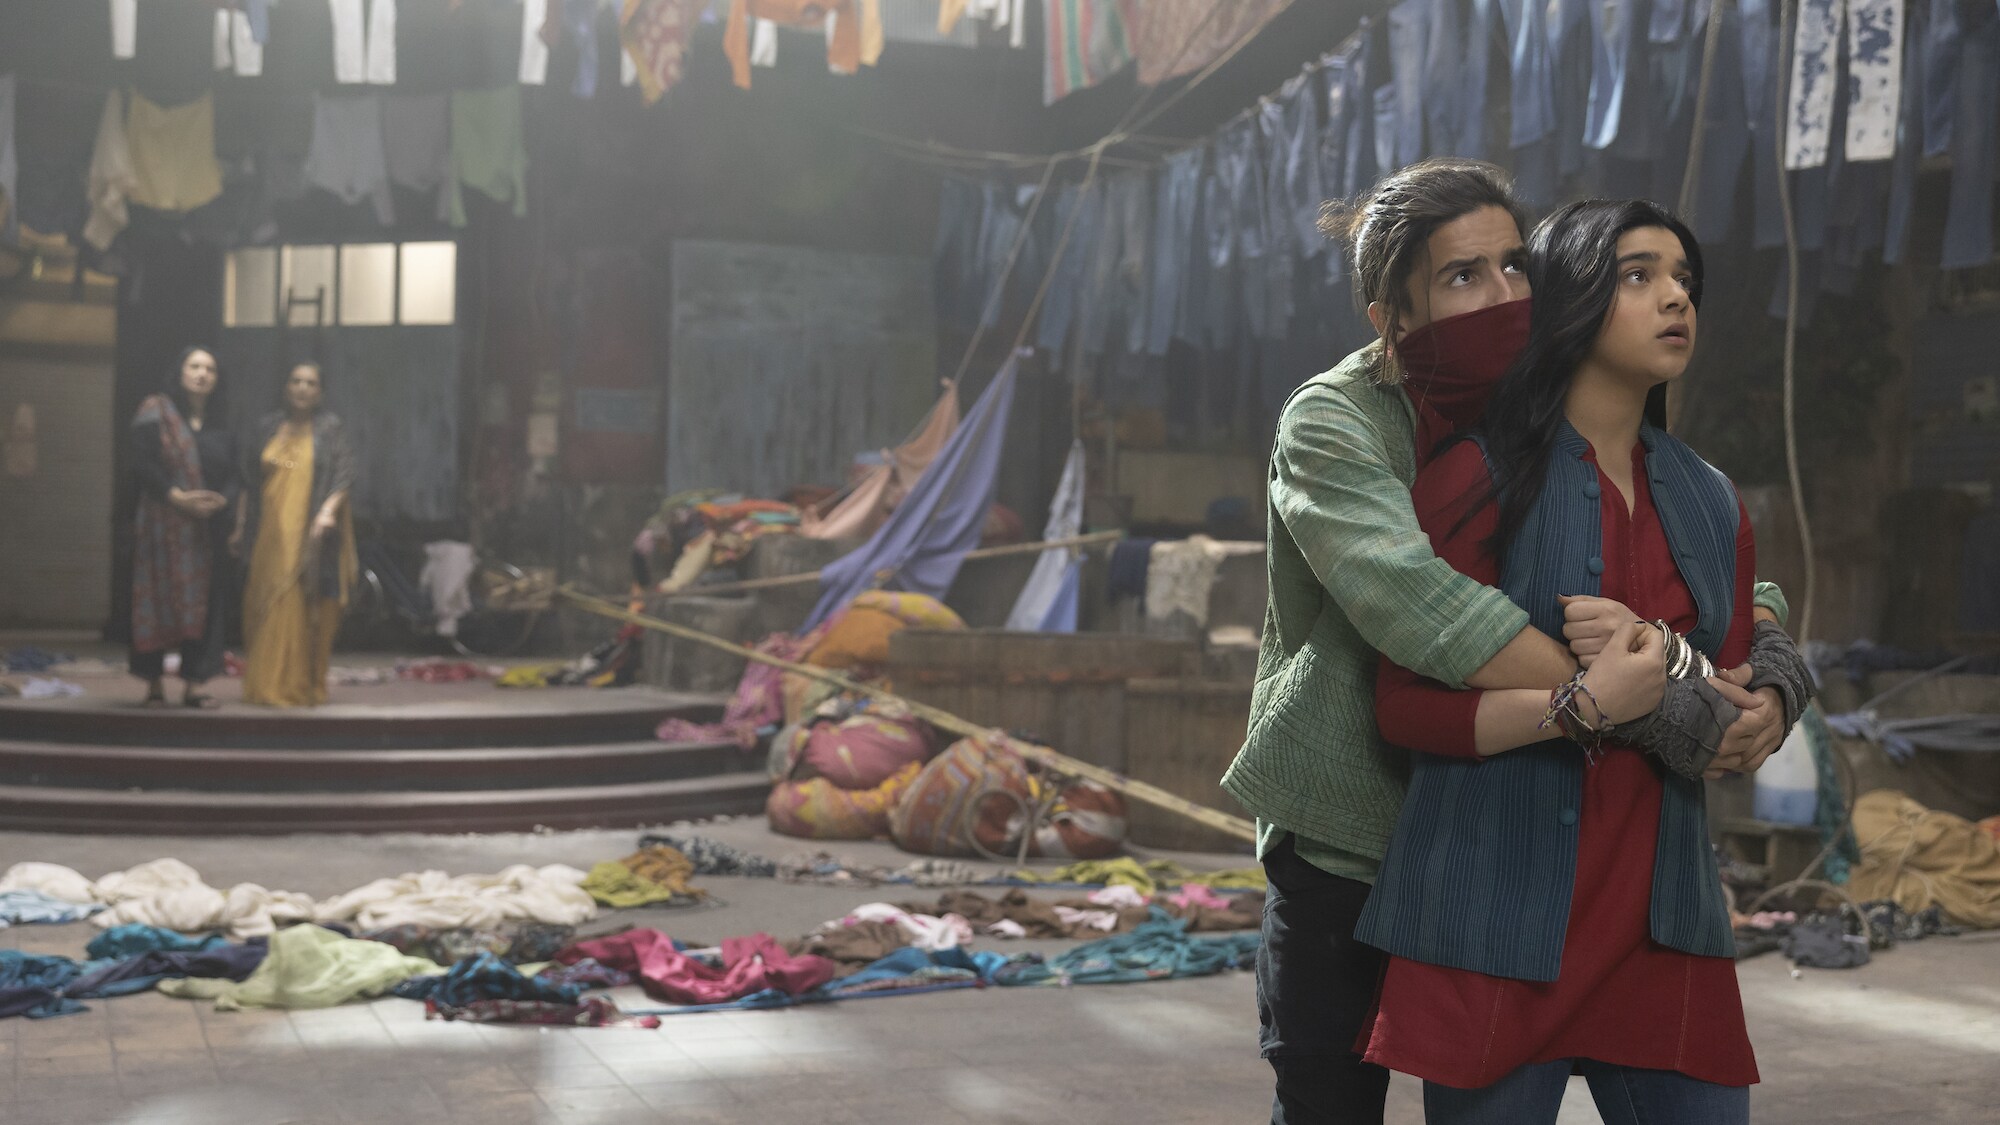 (L-R): Iman Vellani as Ms. Marvel/Kamala Khan and Aramis Knight as Red Dagger/Kareem in Marvel Studios' MS. MARVEL, exclusively on Disney+. Photo by Patrick Brown. ©Marvel Studios 2022. All Rights Reserved.